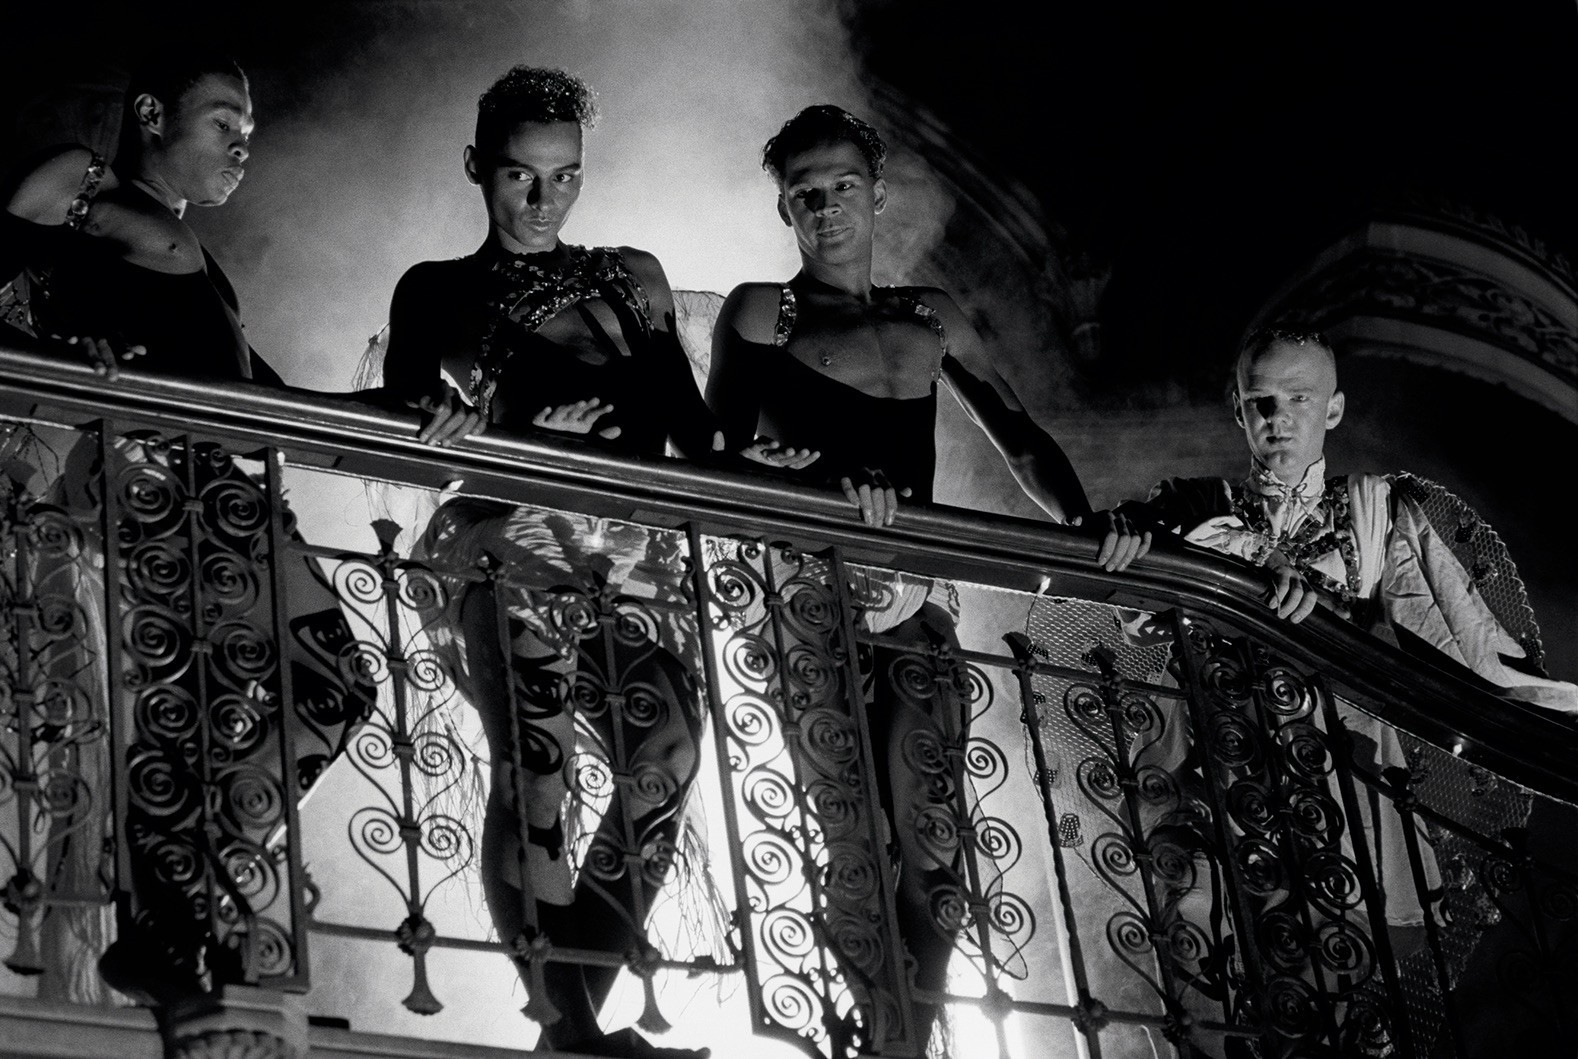 Black and white still image from the film Looking For Langston. Four men look out over a railing. 